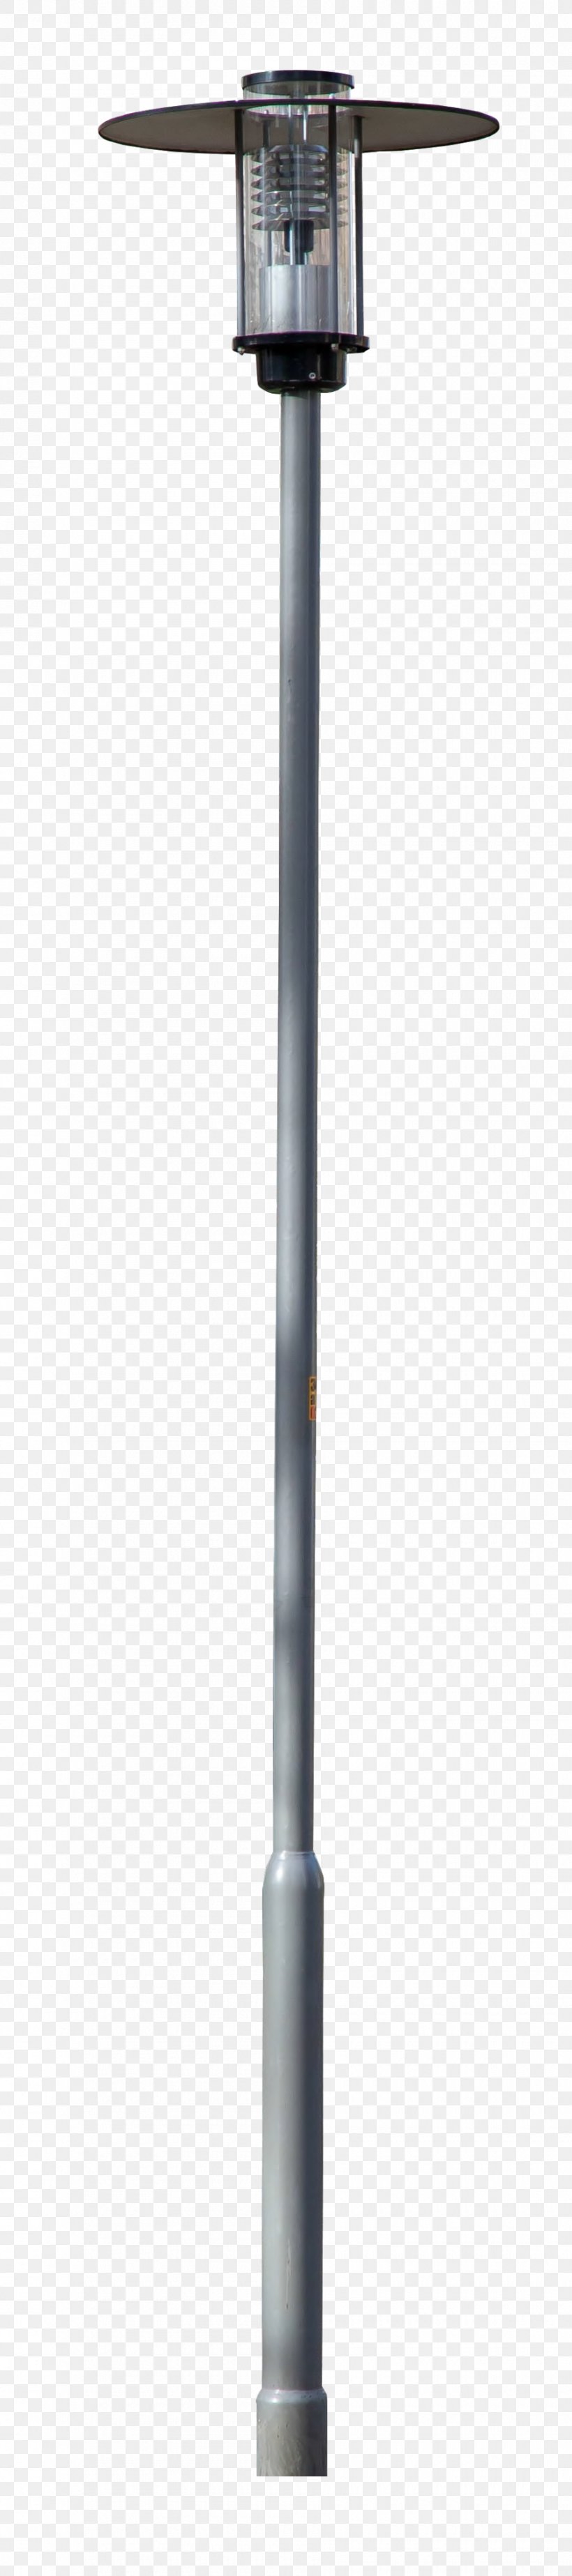 Street Light Transparency Clip Art, PNG, 900x4056px, Light, Display Resolution, Electric Light, Hardware, Image File Formats Download Free